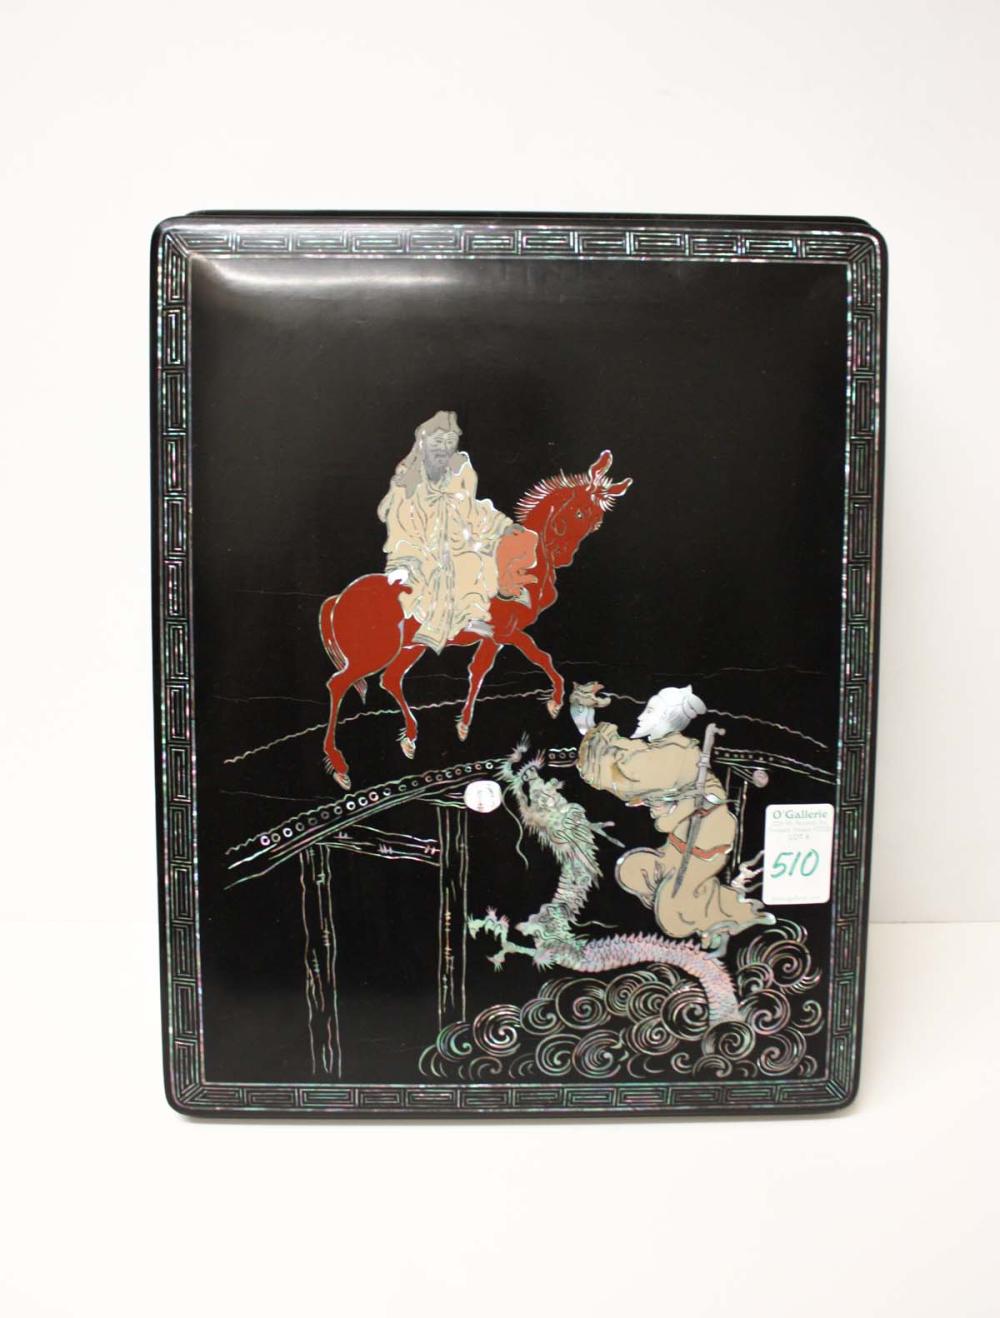 MOTHER-OF-PEARL INLAID BLACK LACQUER